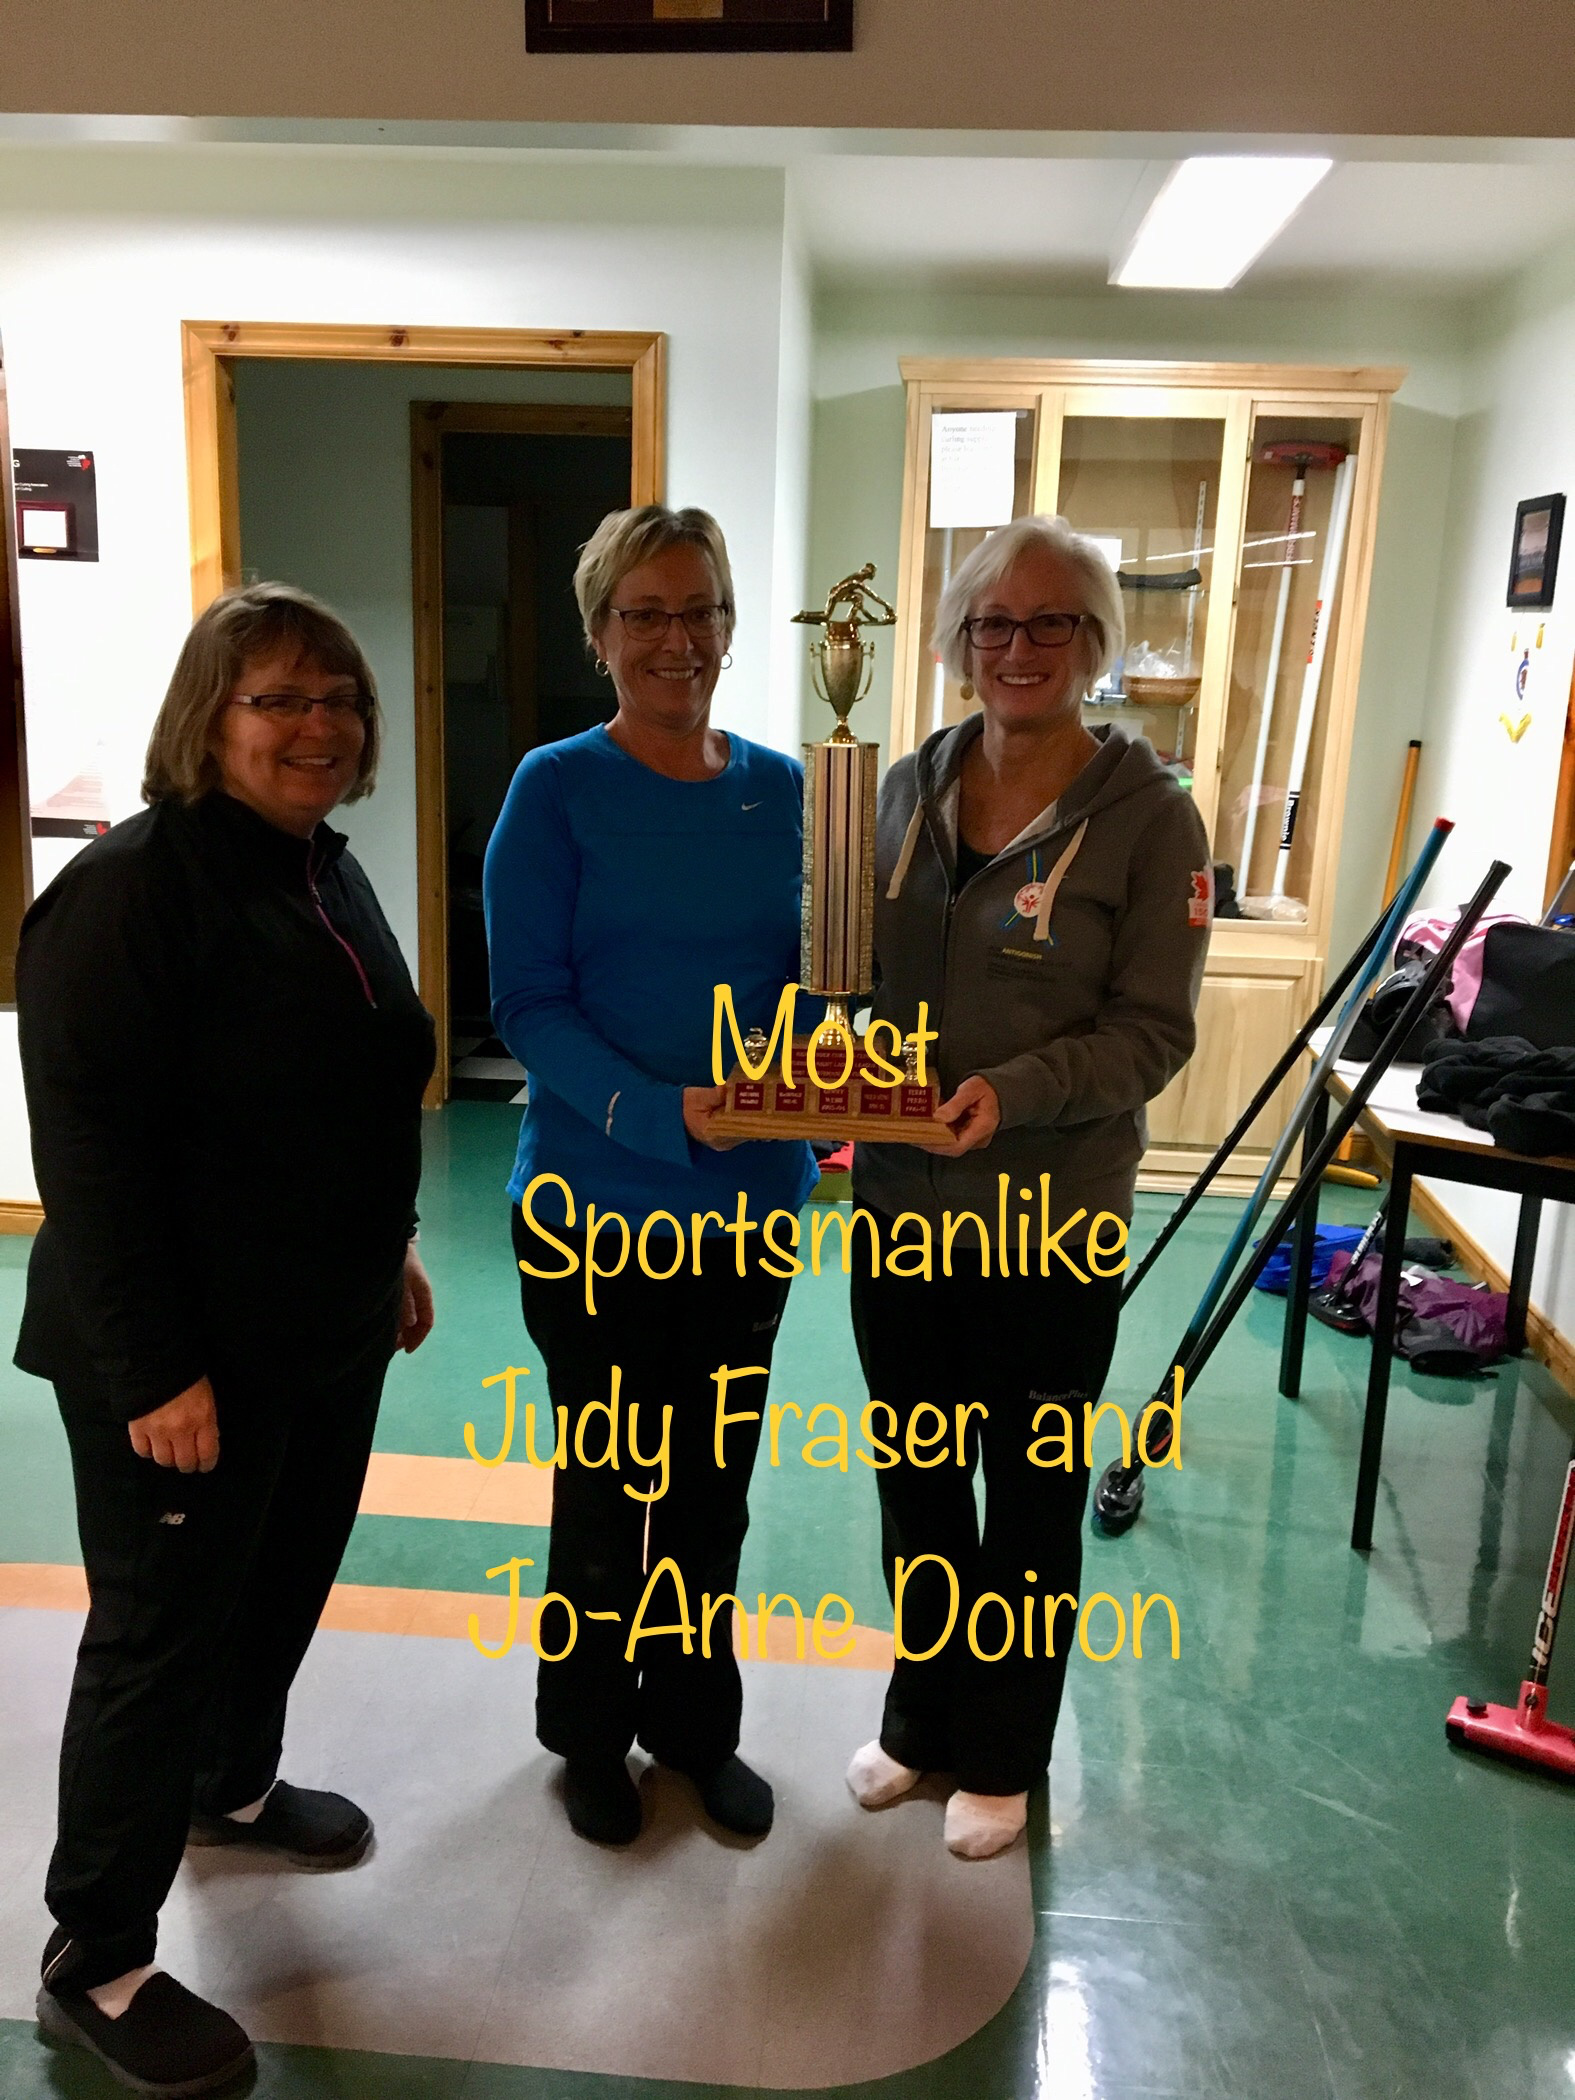 Tuesday Night Ladies Most Sportsmanlike: Judy Fraser (middle) and Joanne Doiron (right)
Presented by Colleen MacDougall (left)